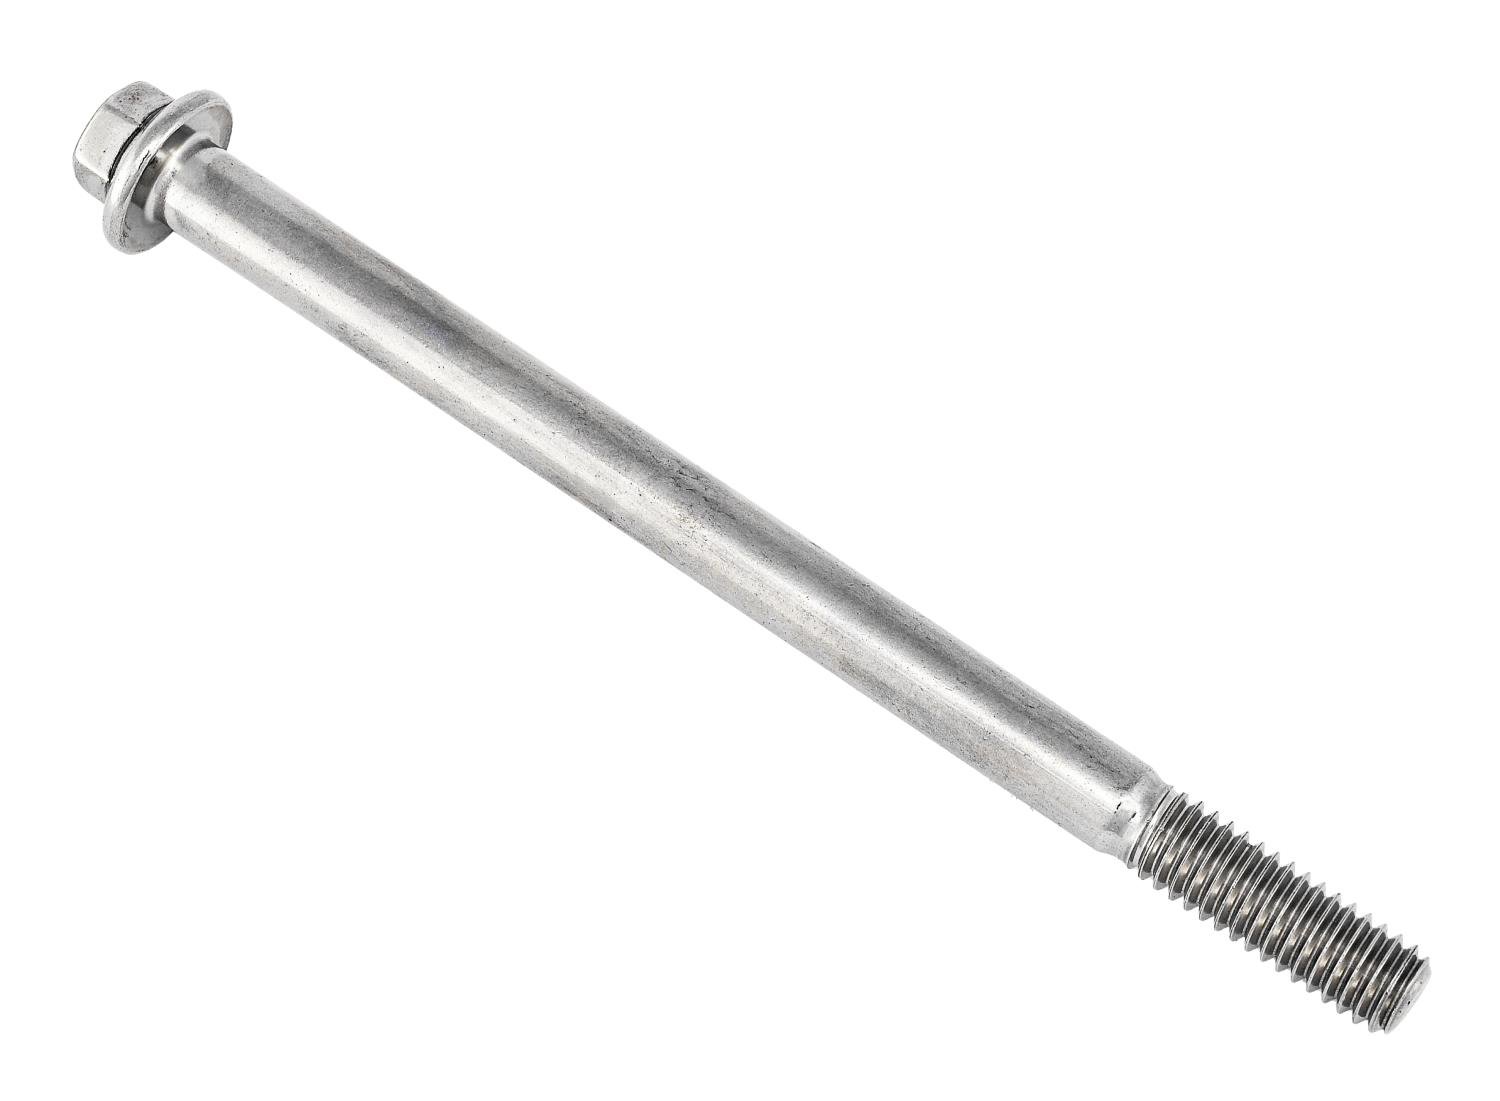 Stainless Steel Hex Bolt [5/16 in.-18 x 4.750 in. UHL]